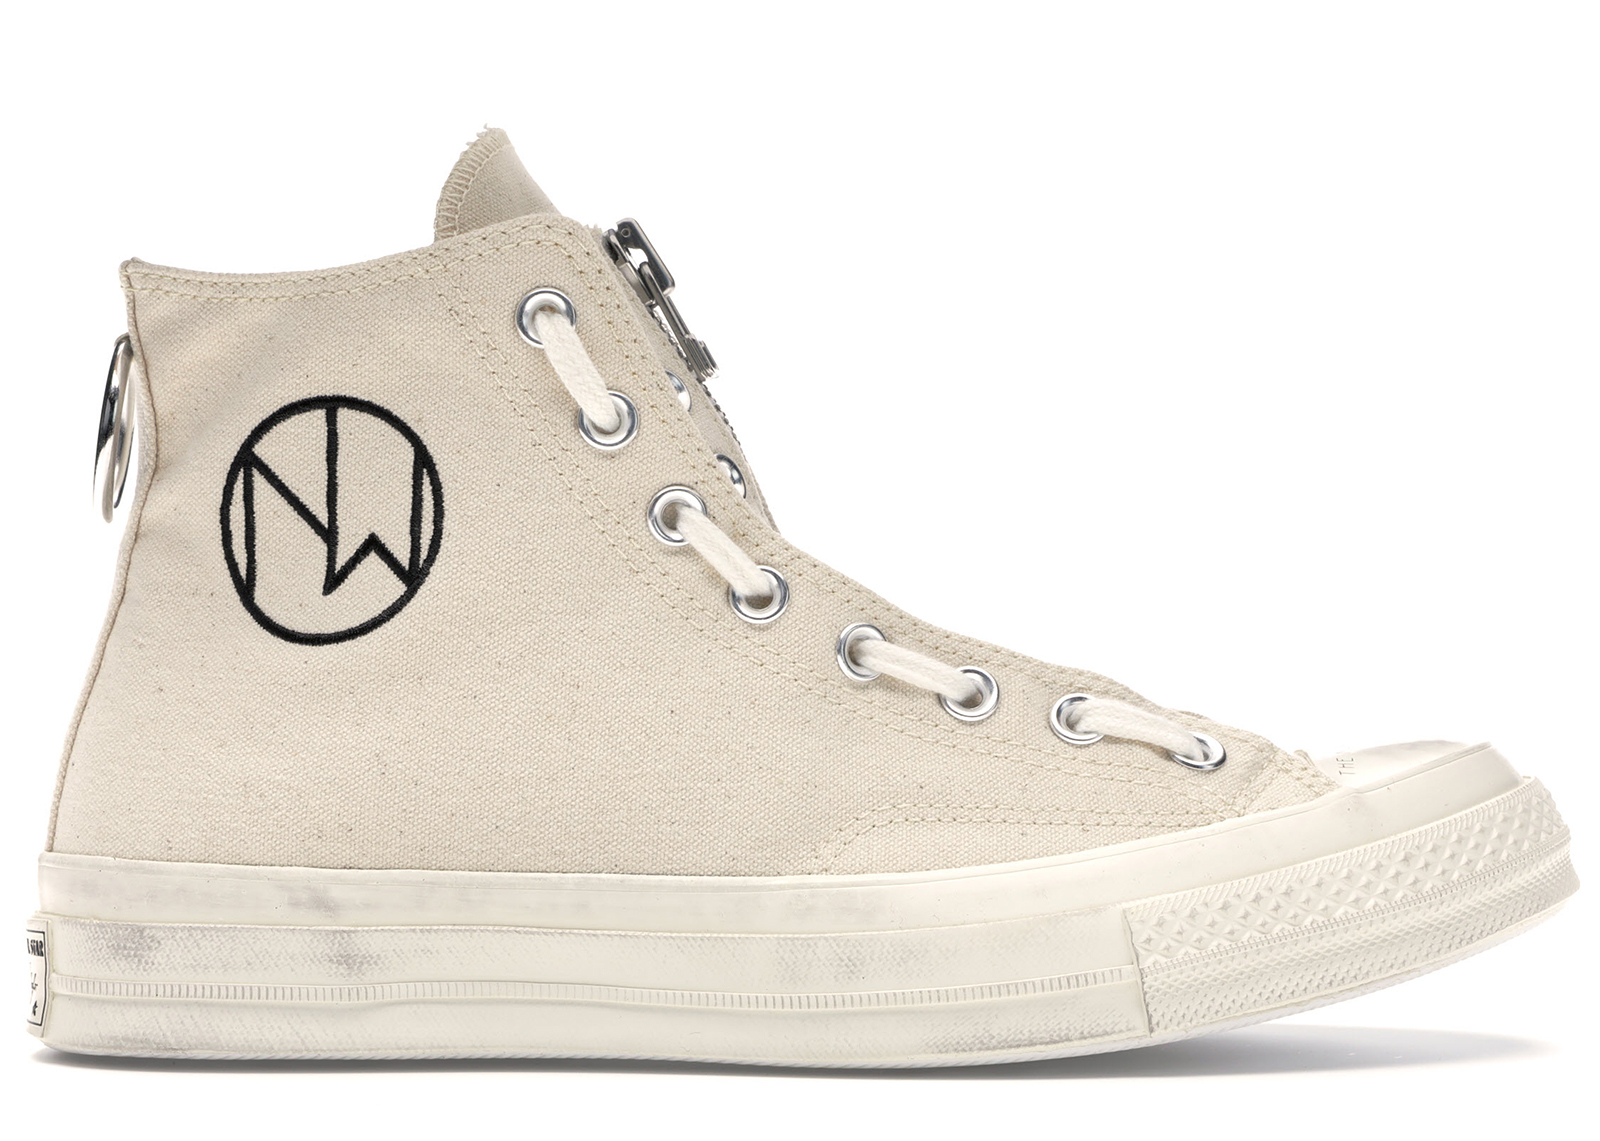 Converse Chuck Taylor All Star 70 Hi Undercover New Warriors White